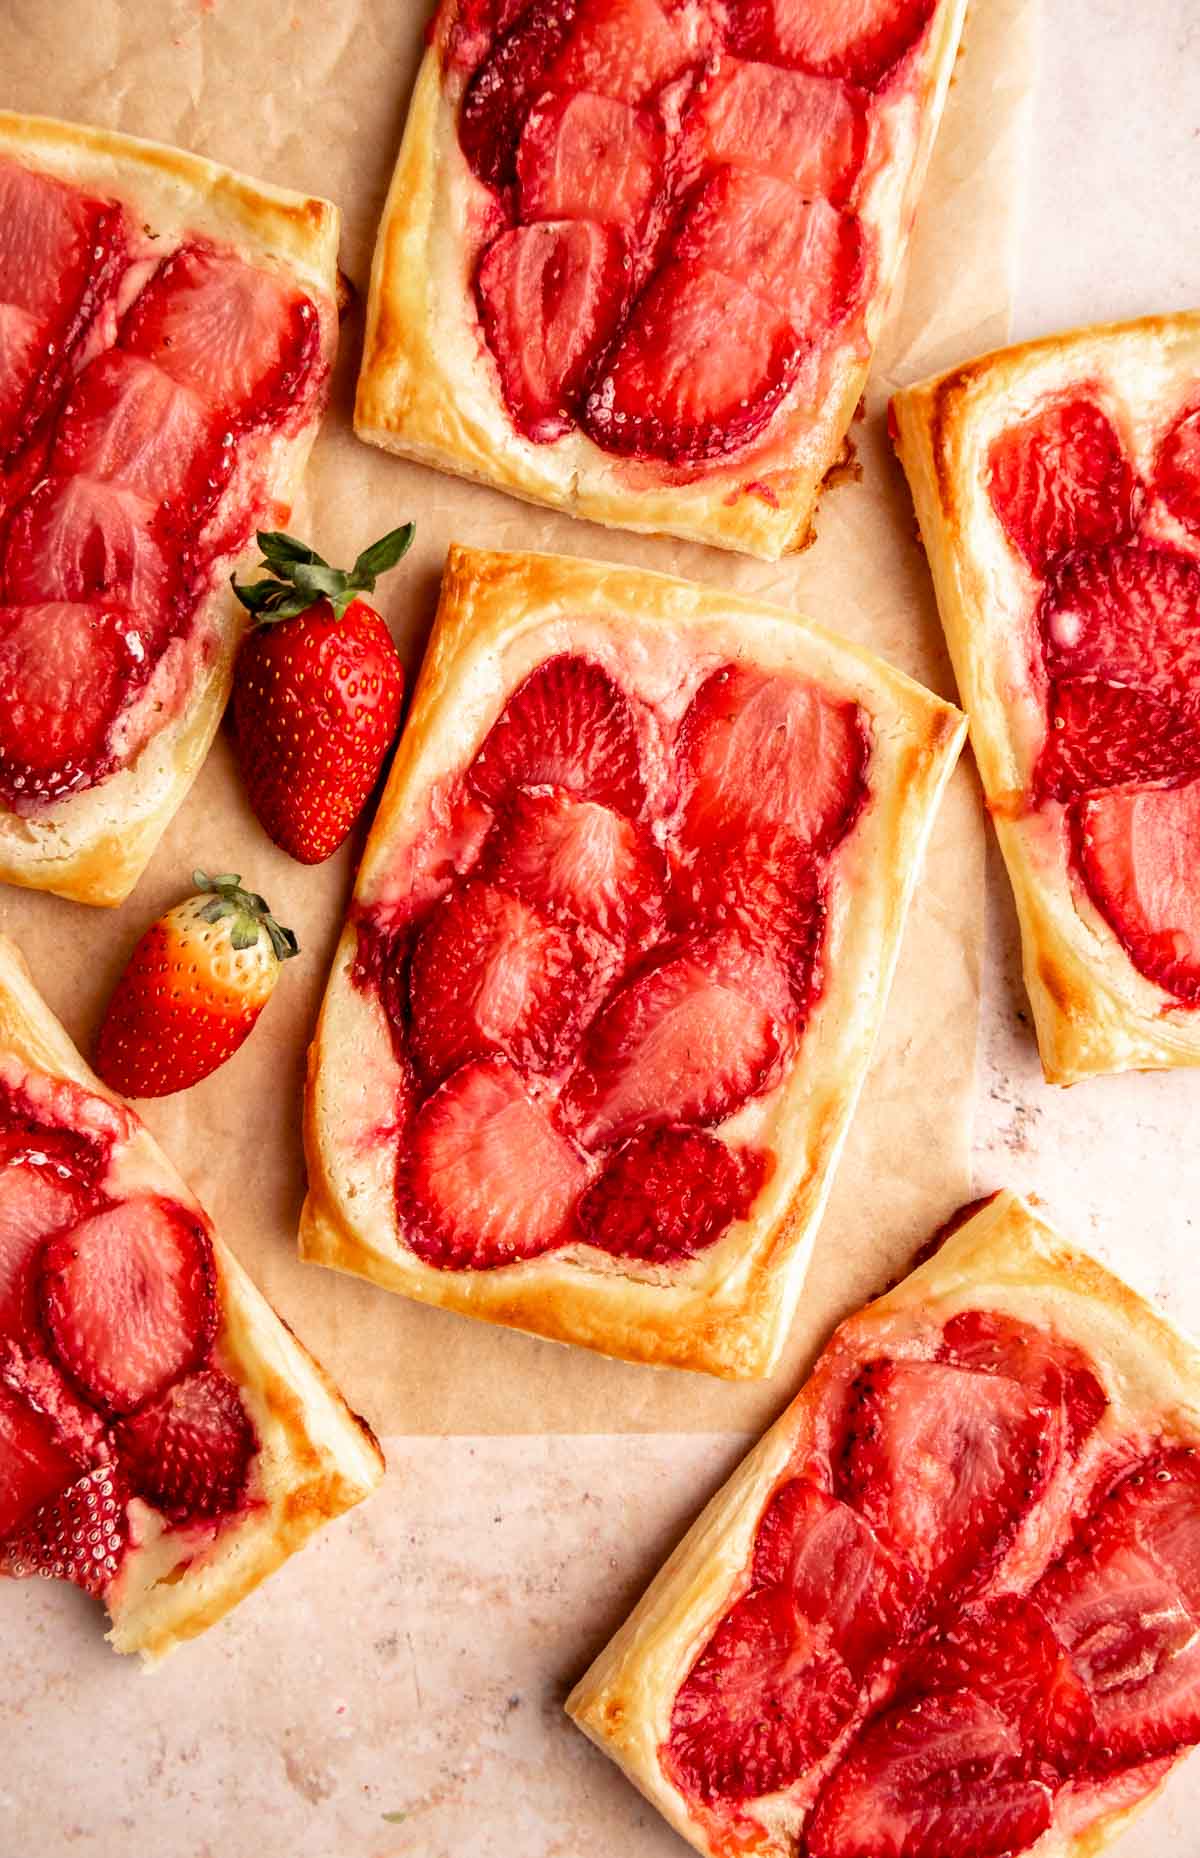 Strawberry danishes on a parchment paper with fresh strawberries.